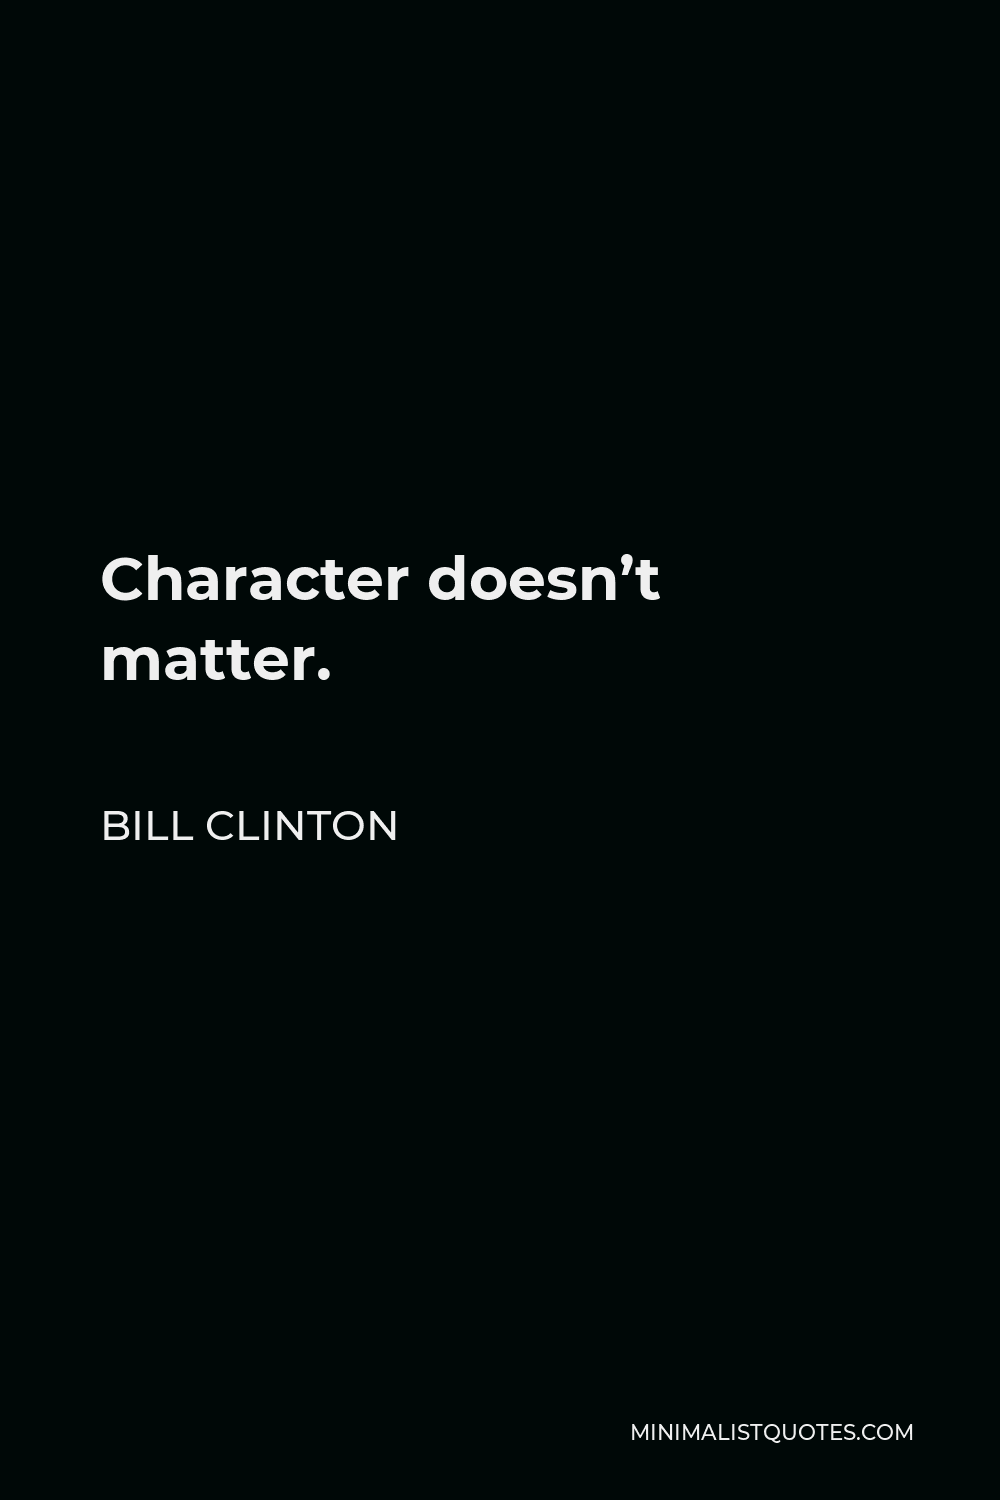 Bill Clinton Quote - Character doesn’t matter.